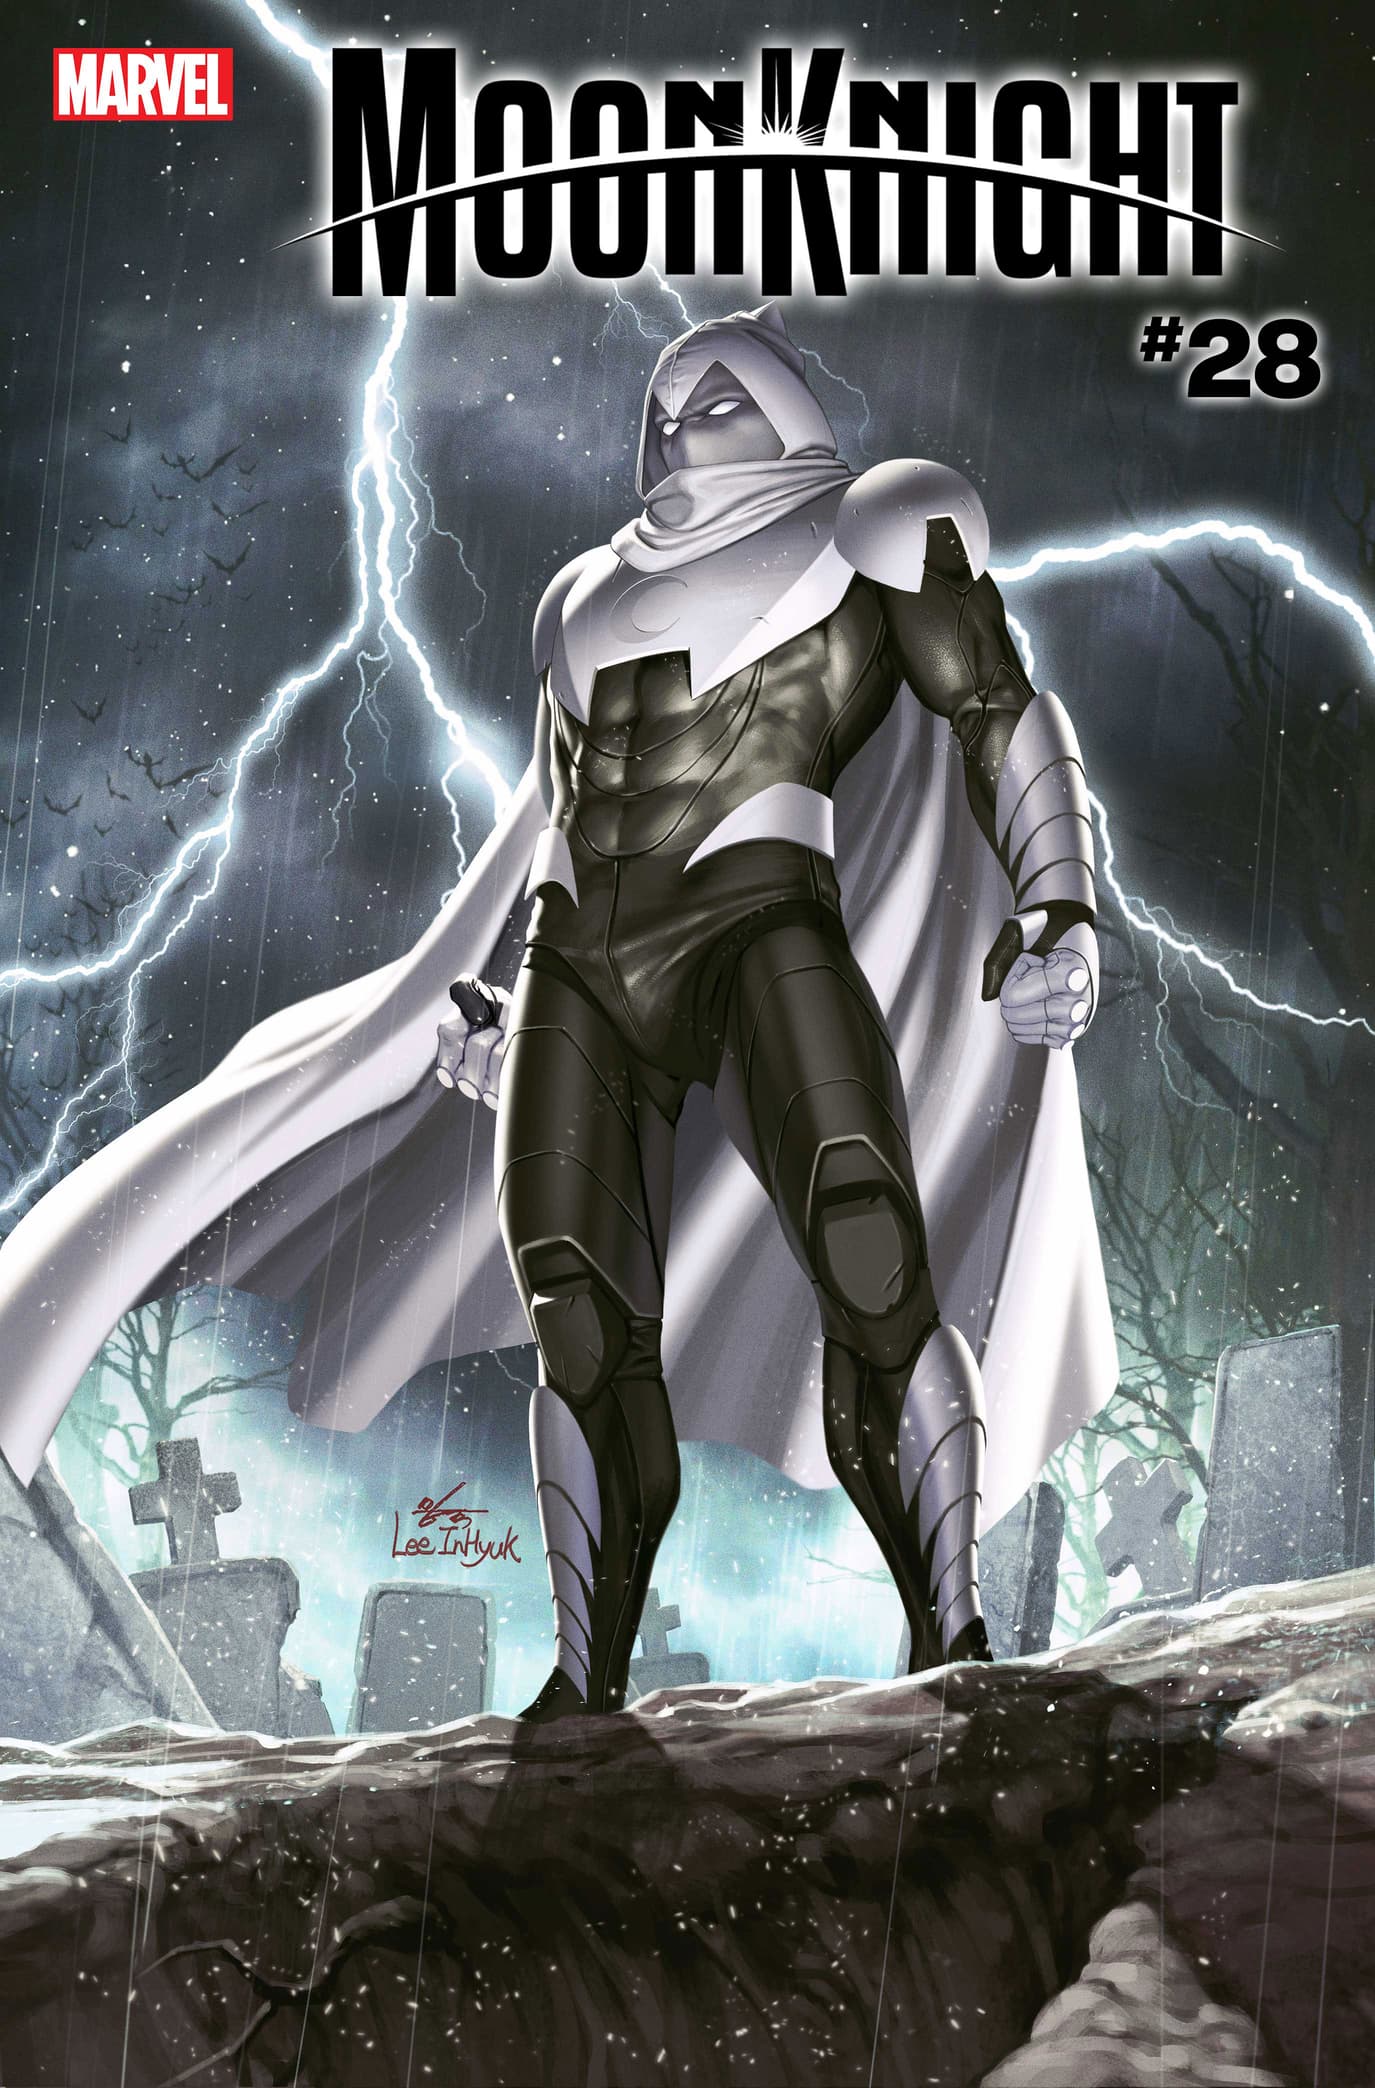 MOON KNIGHT #28 Last Days of Moon Knight Variant Cover by Inhyuk Lee